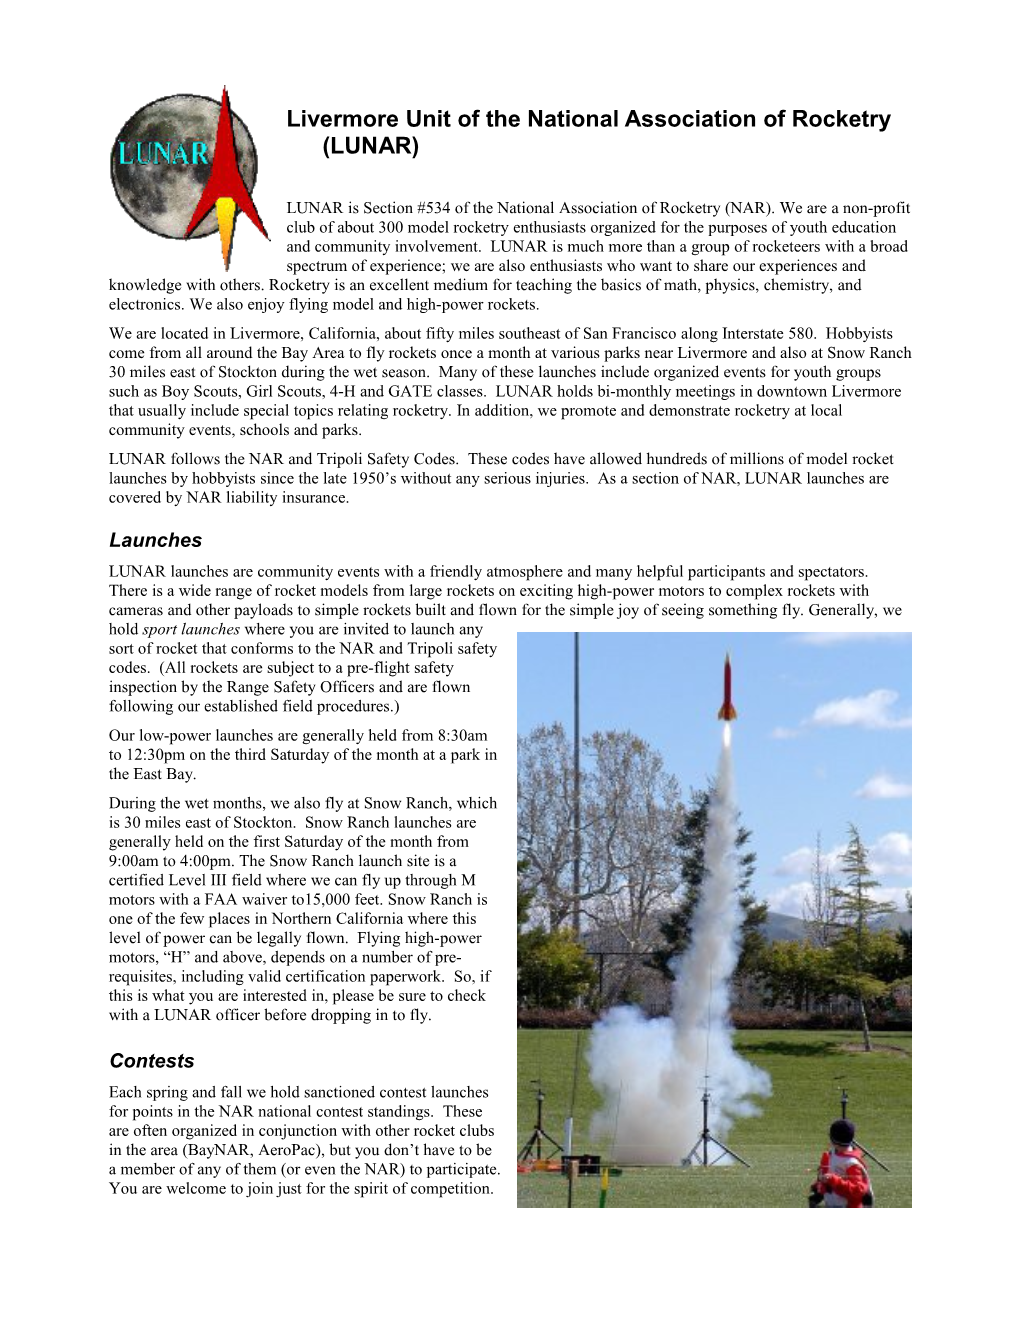 Livermore Unit of the National Association of Rocketry (LUNAR)